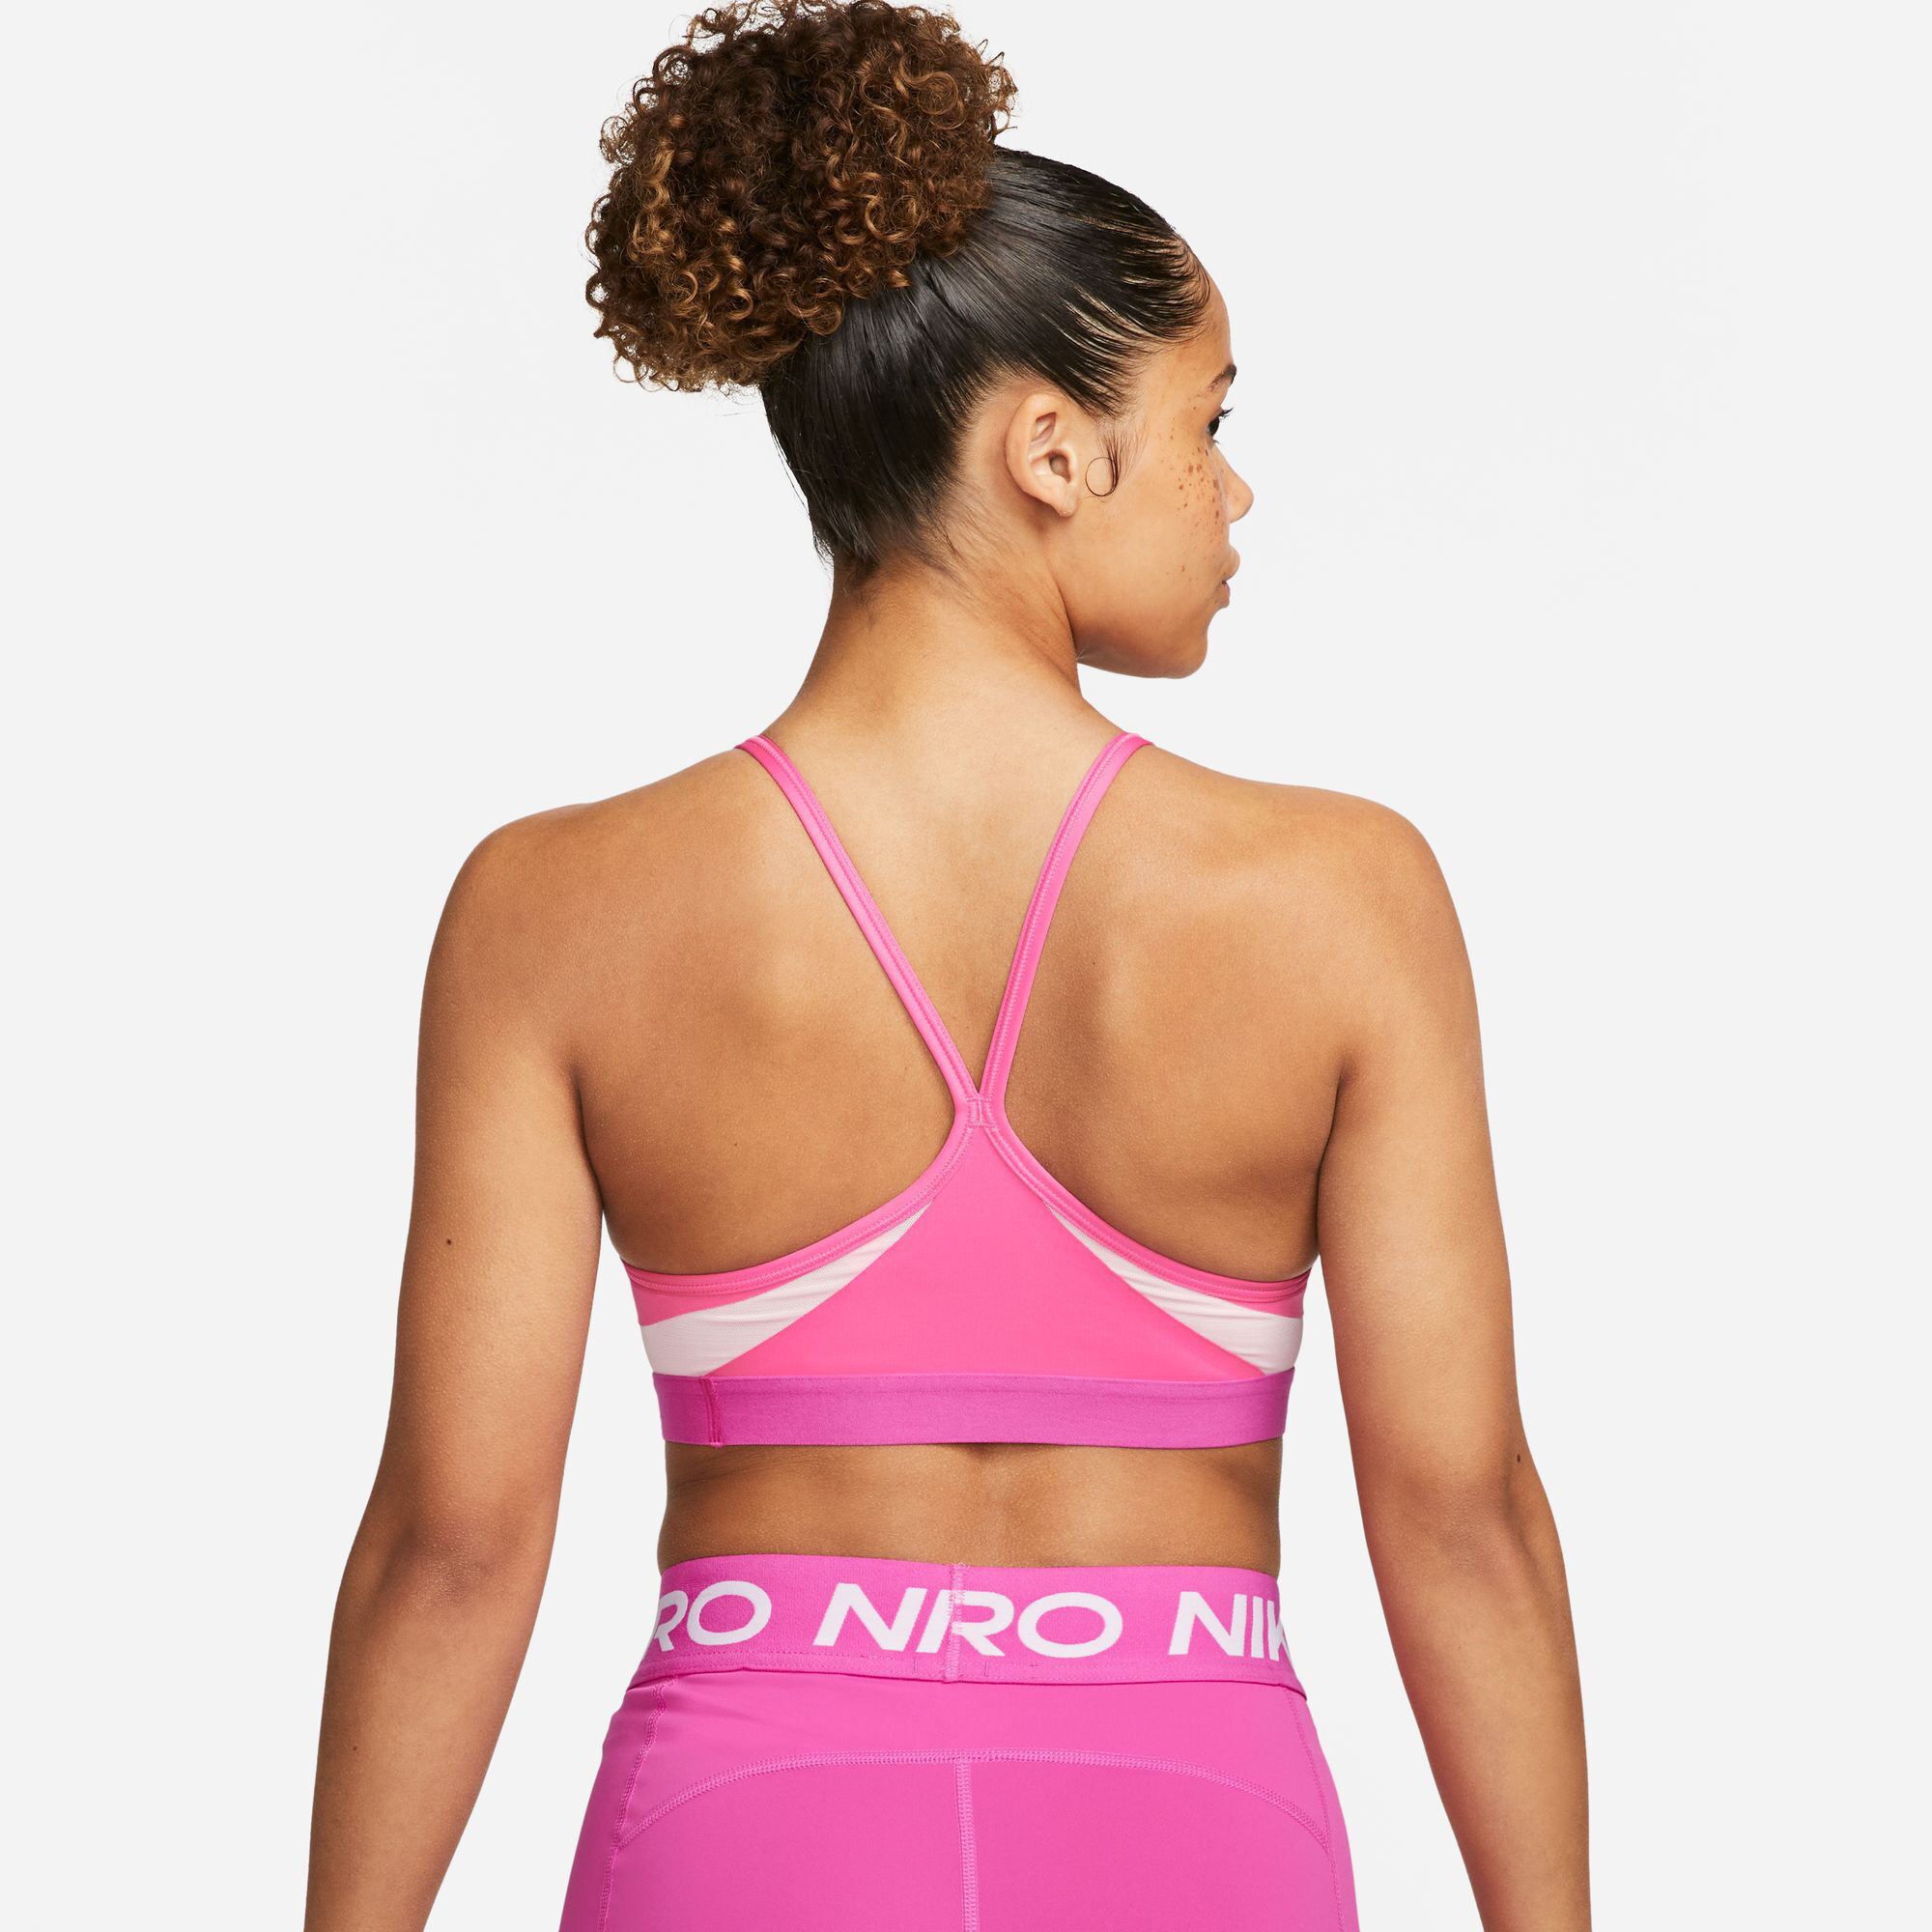 Nike Pro Indy Bra - Undershirts And Fitness Tops